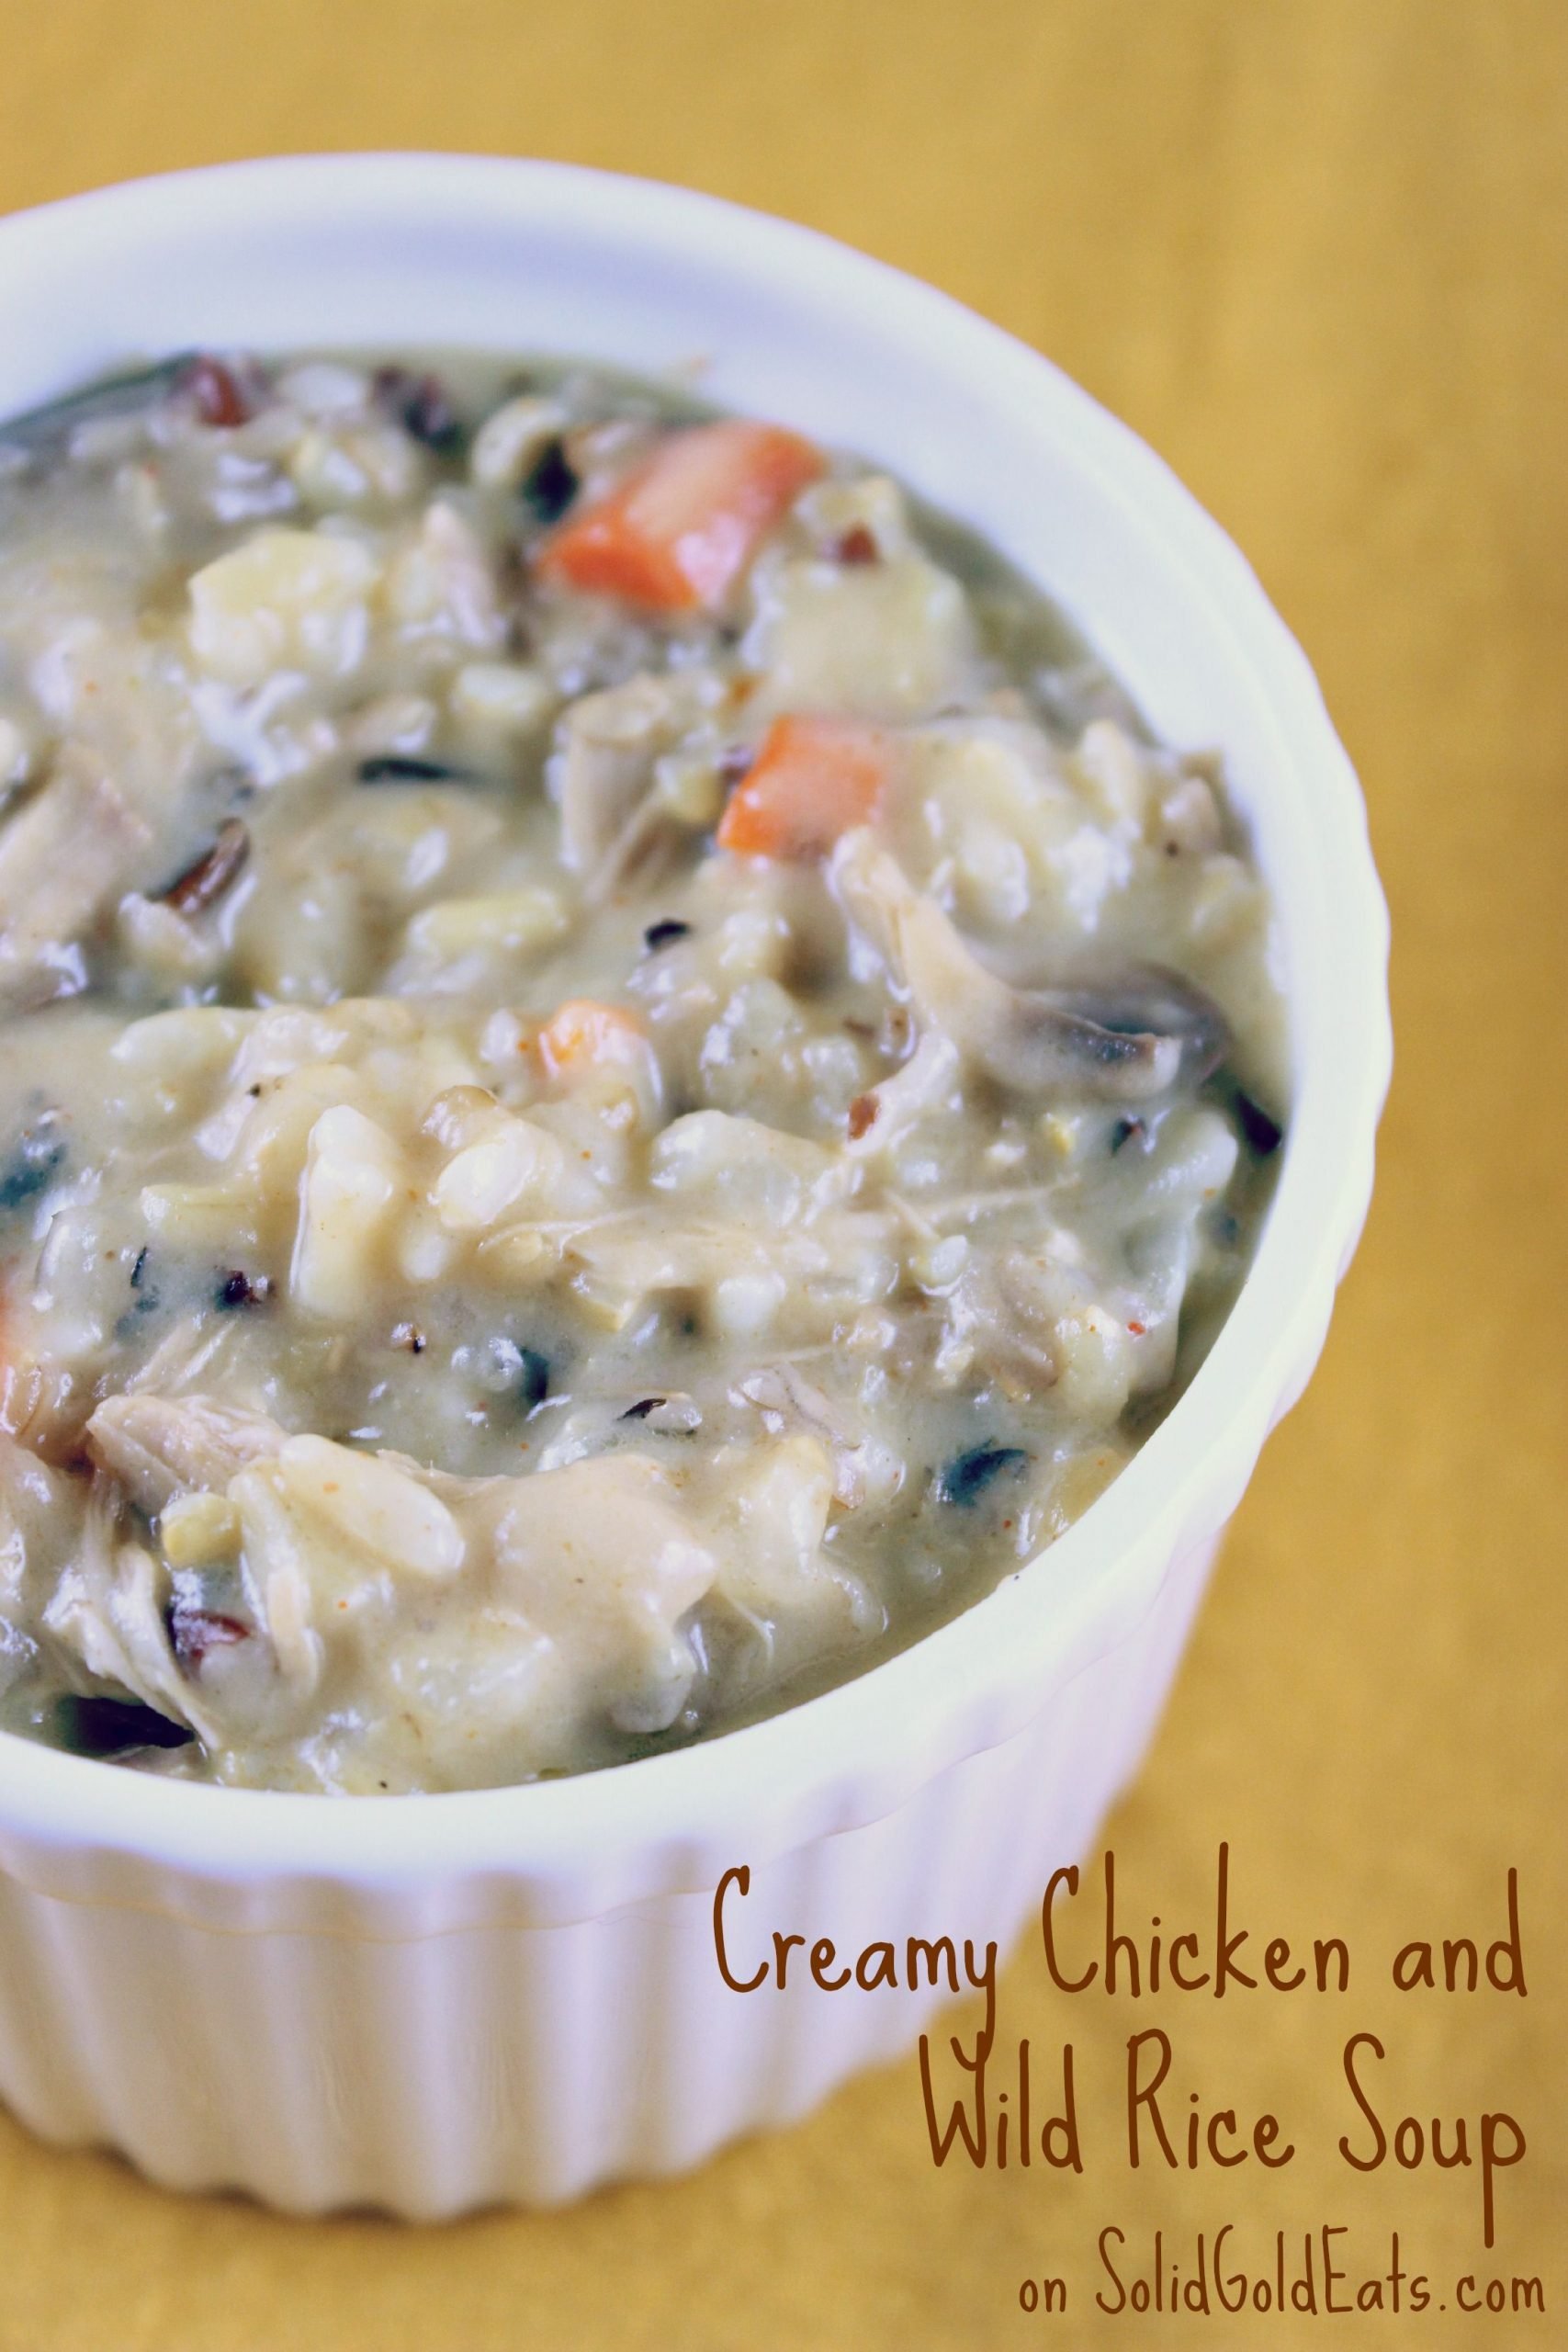 Wild rice soup, Cooking recipes, Healthy dishes